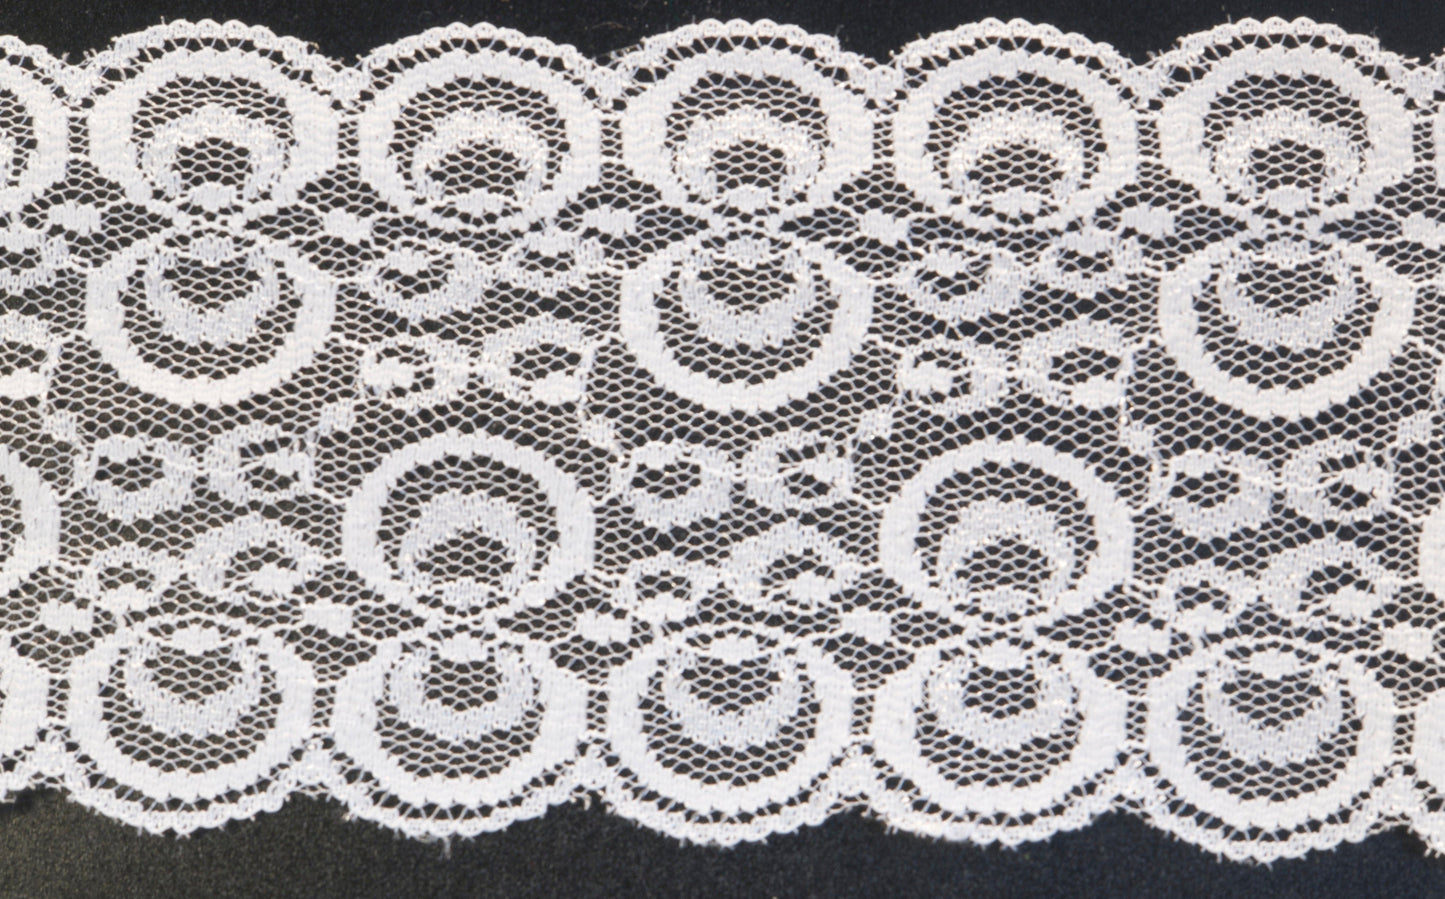 Synthetic lace 76 mm